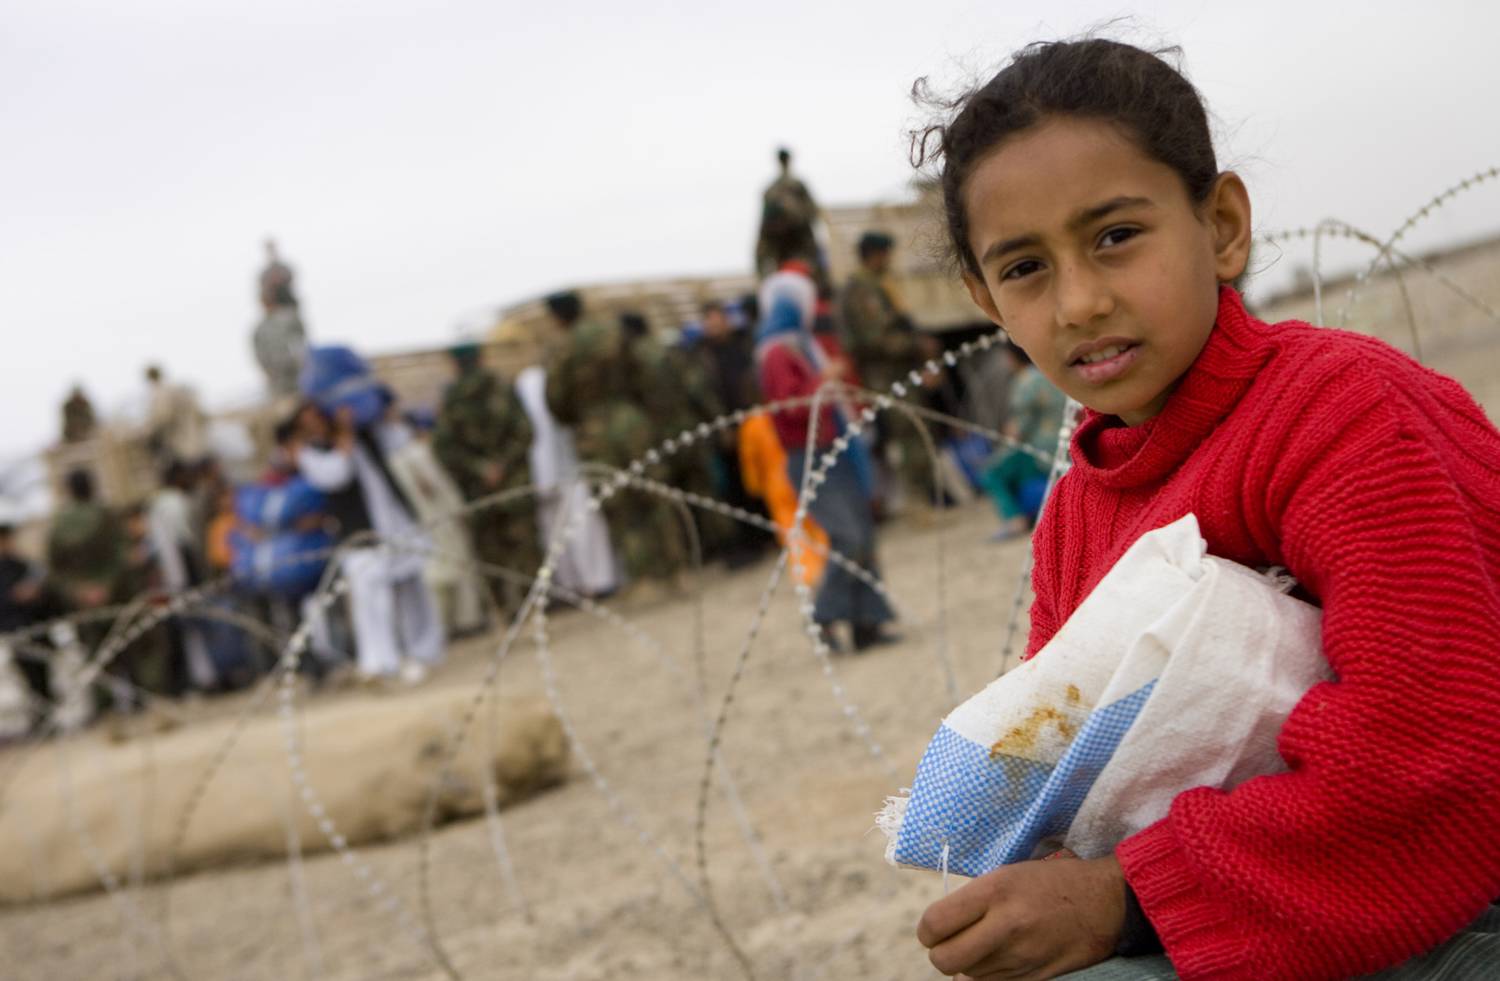 KANDAHAR, Afghanistan -- A young girl is watching over the distribution while she guards her own supplies until somebody comes to help her move it. Photo: Sgt Chris Halton RLC, British Army via Flickr